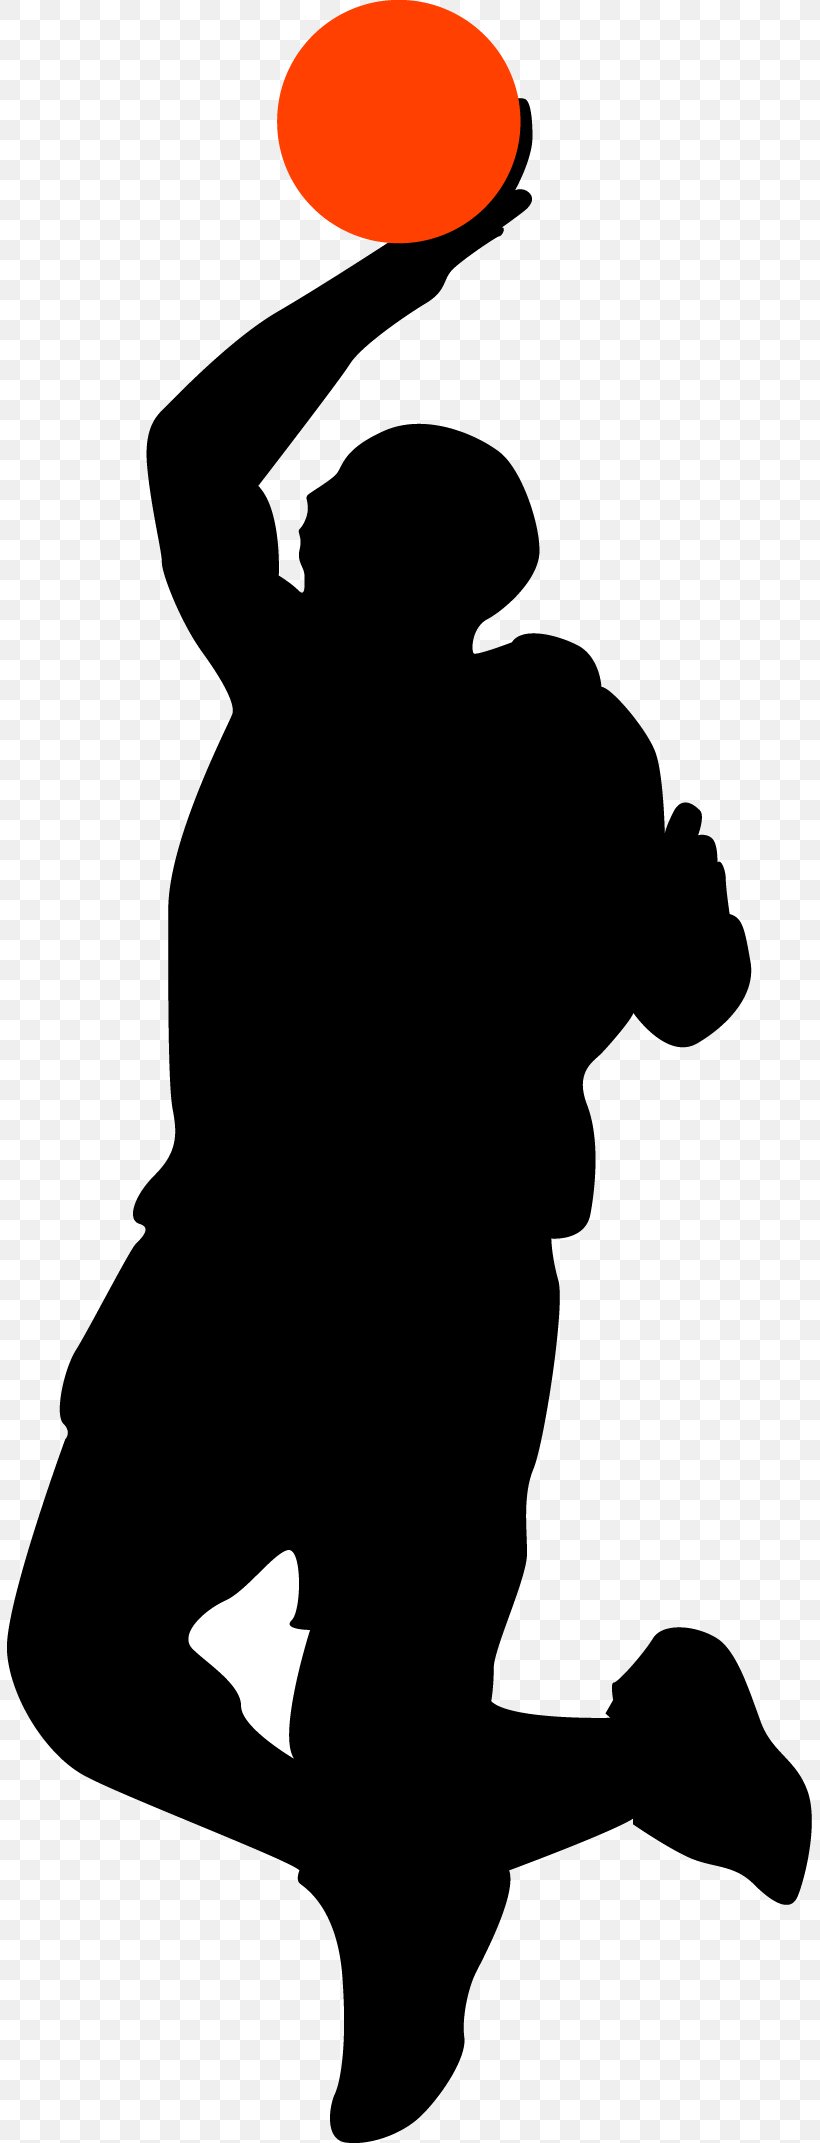 Basketball Trivia Basketball Player Silhouette, PNG, 805x2143px, Basketball Trivia, Android, Art, Athlete, Basketball Download Free